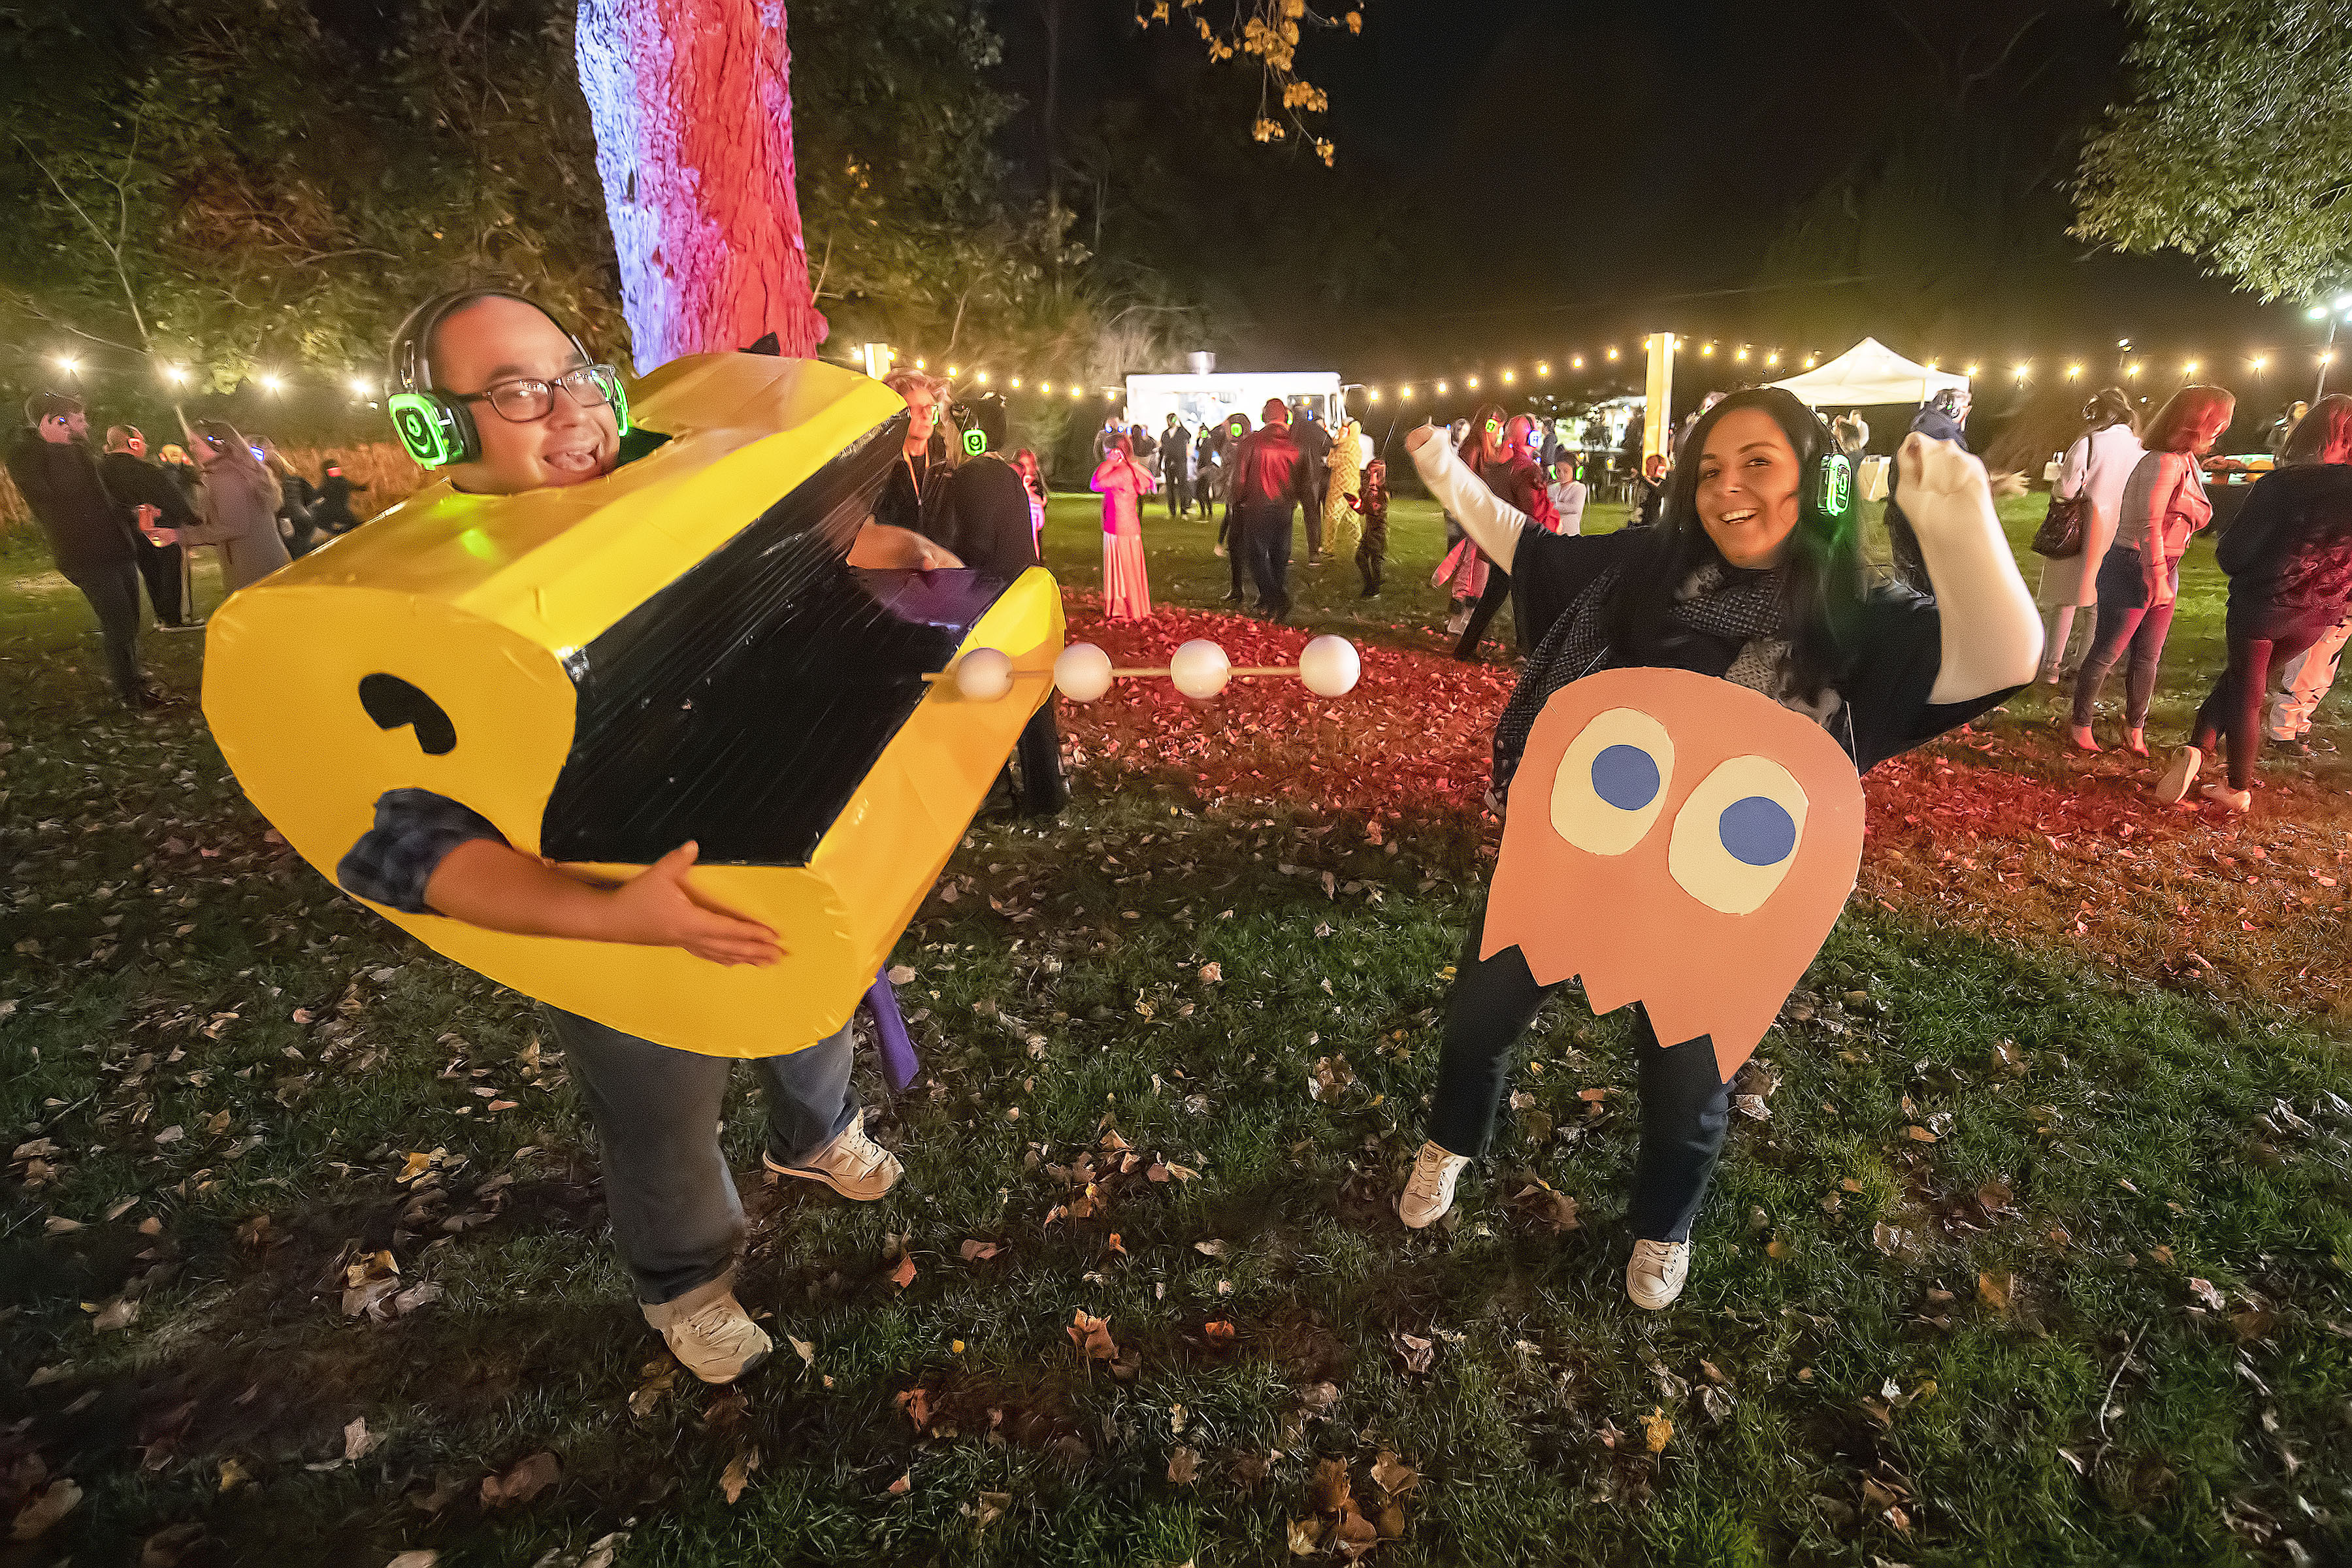 Andrew and Charlotte DeLeo gobble up the dance floor with Pac Man outfits during the Halloween Silent Disco Party sponsored by the Southampton Arts Center on Saturday night.  MICHAEL HELLER